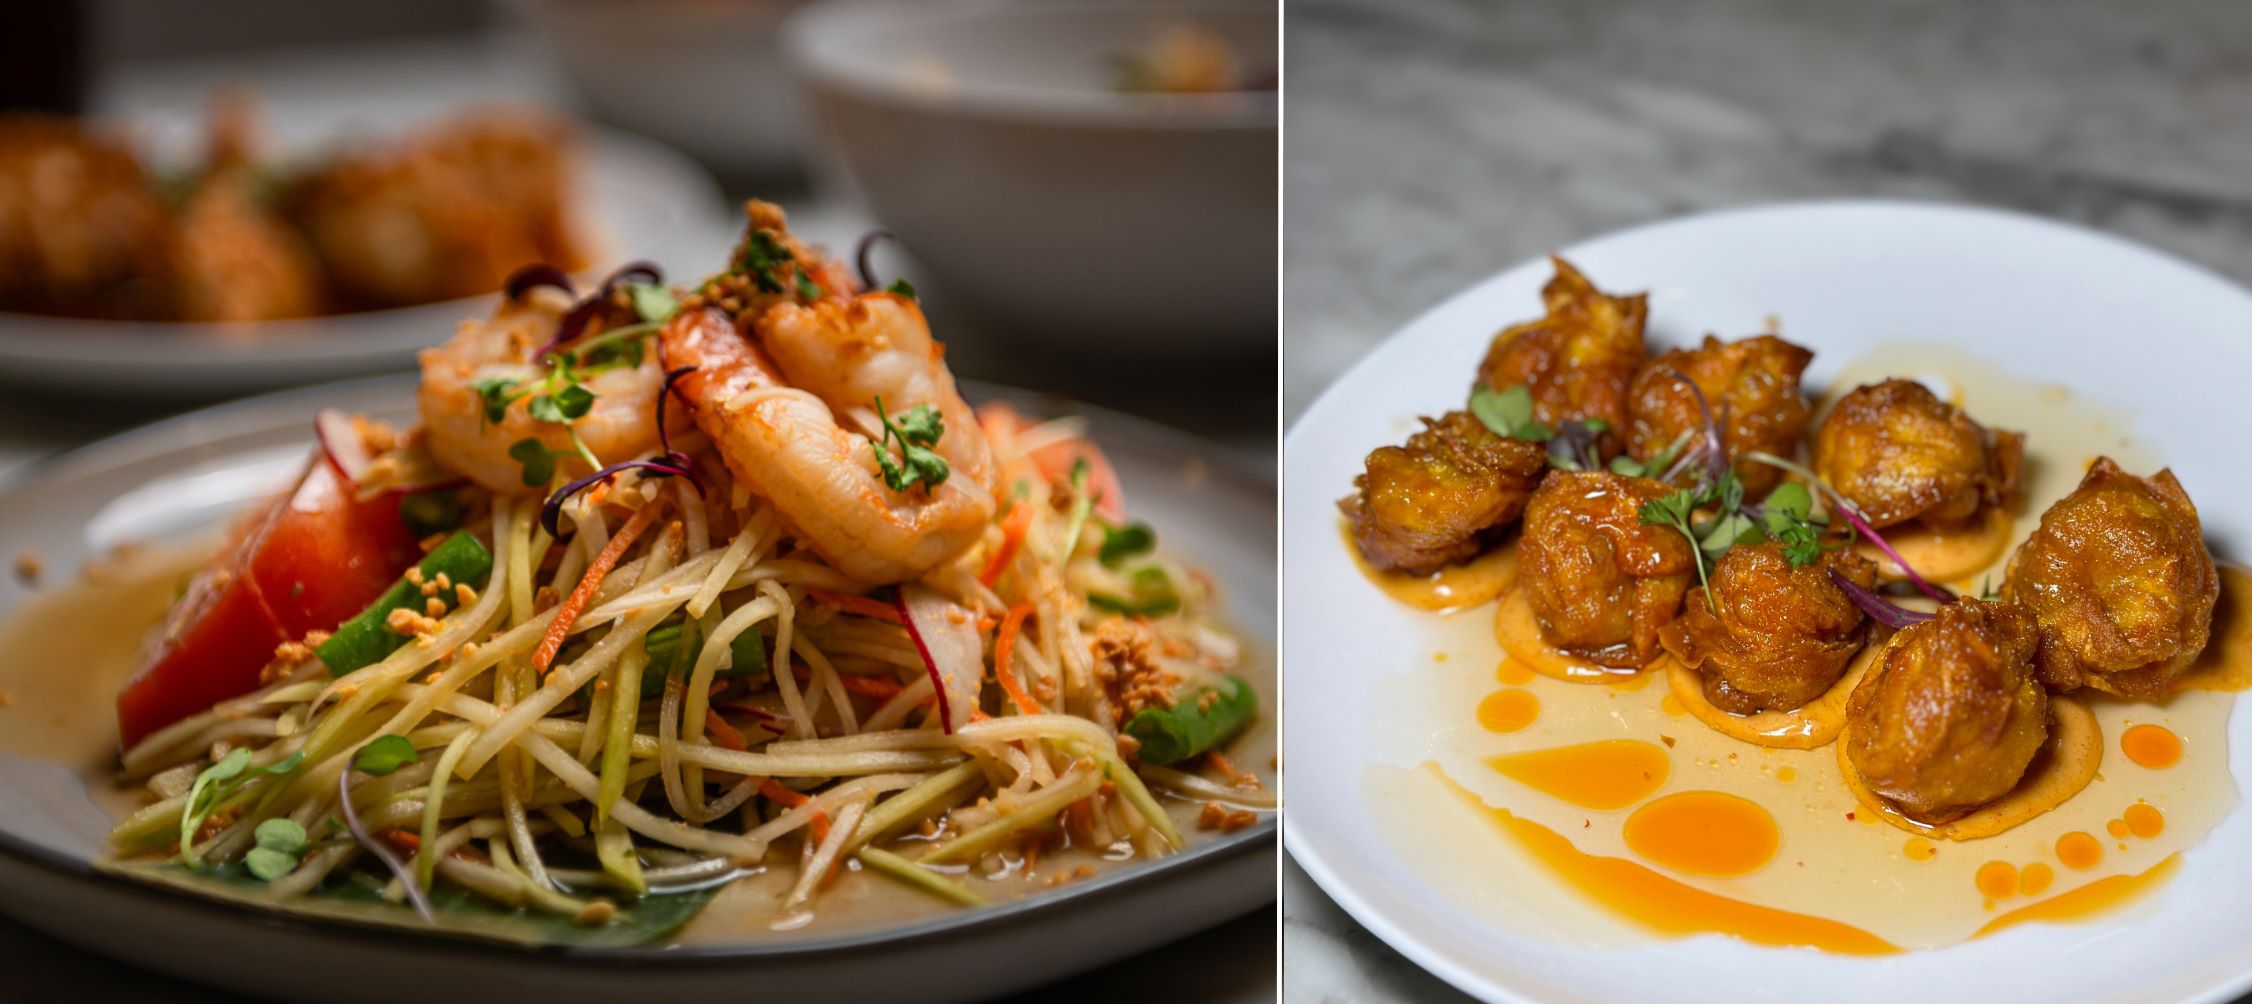 White Elephant Invites You to Try Some of the Best Thai Food in LA